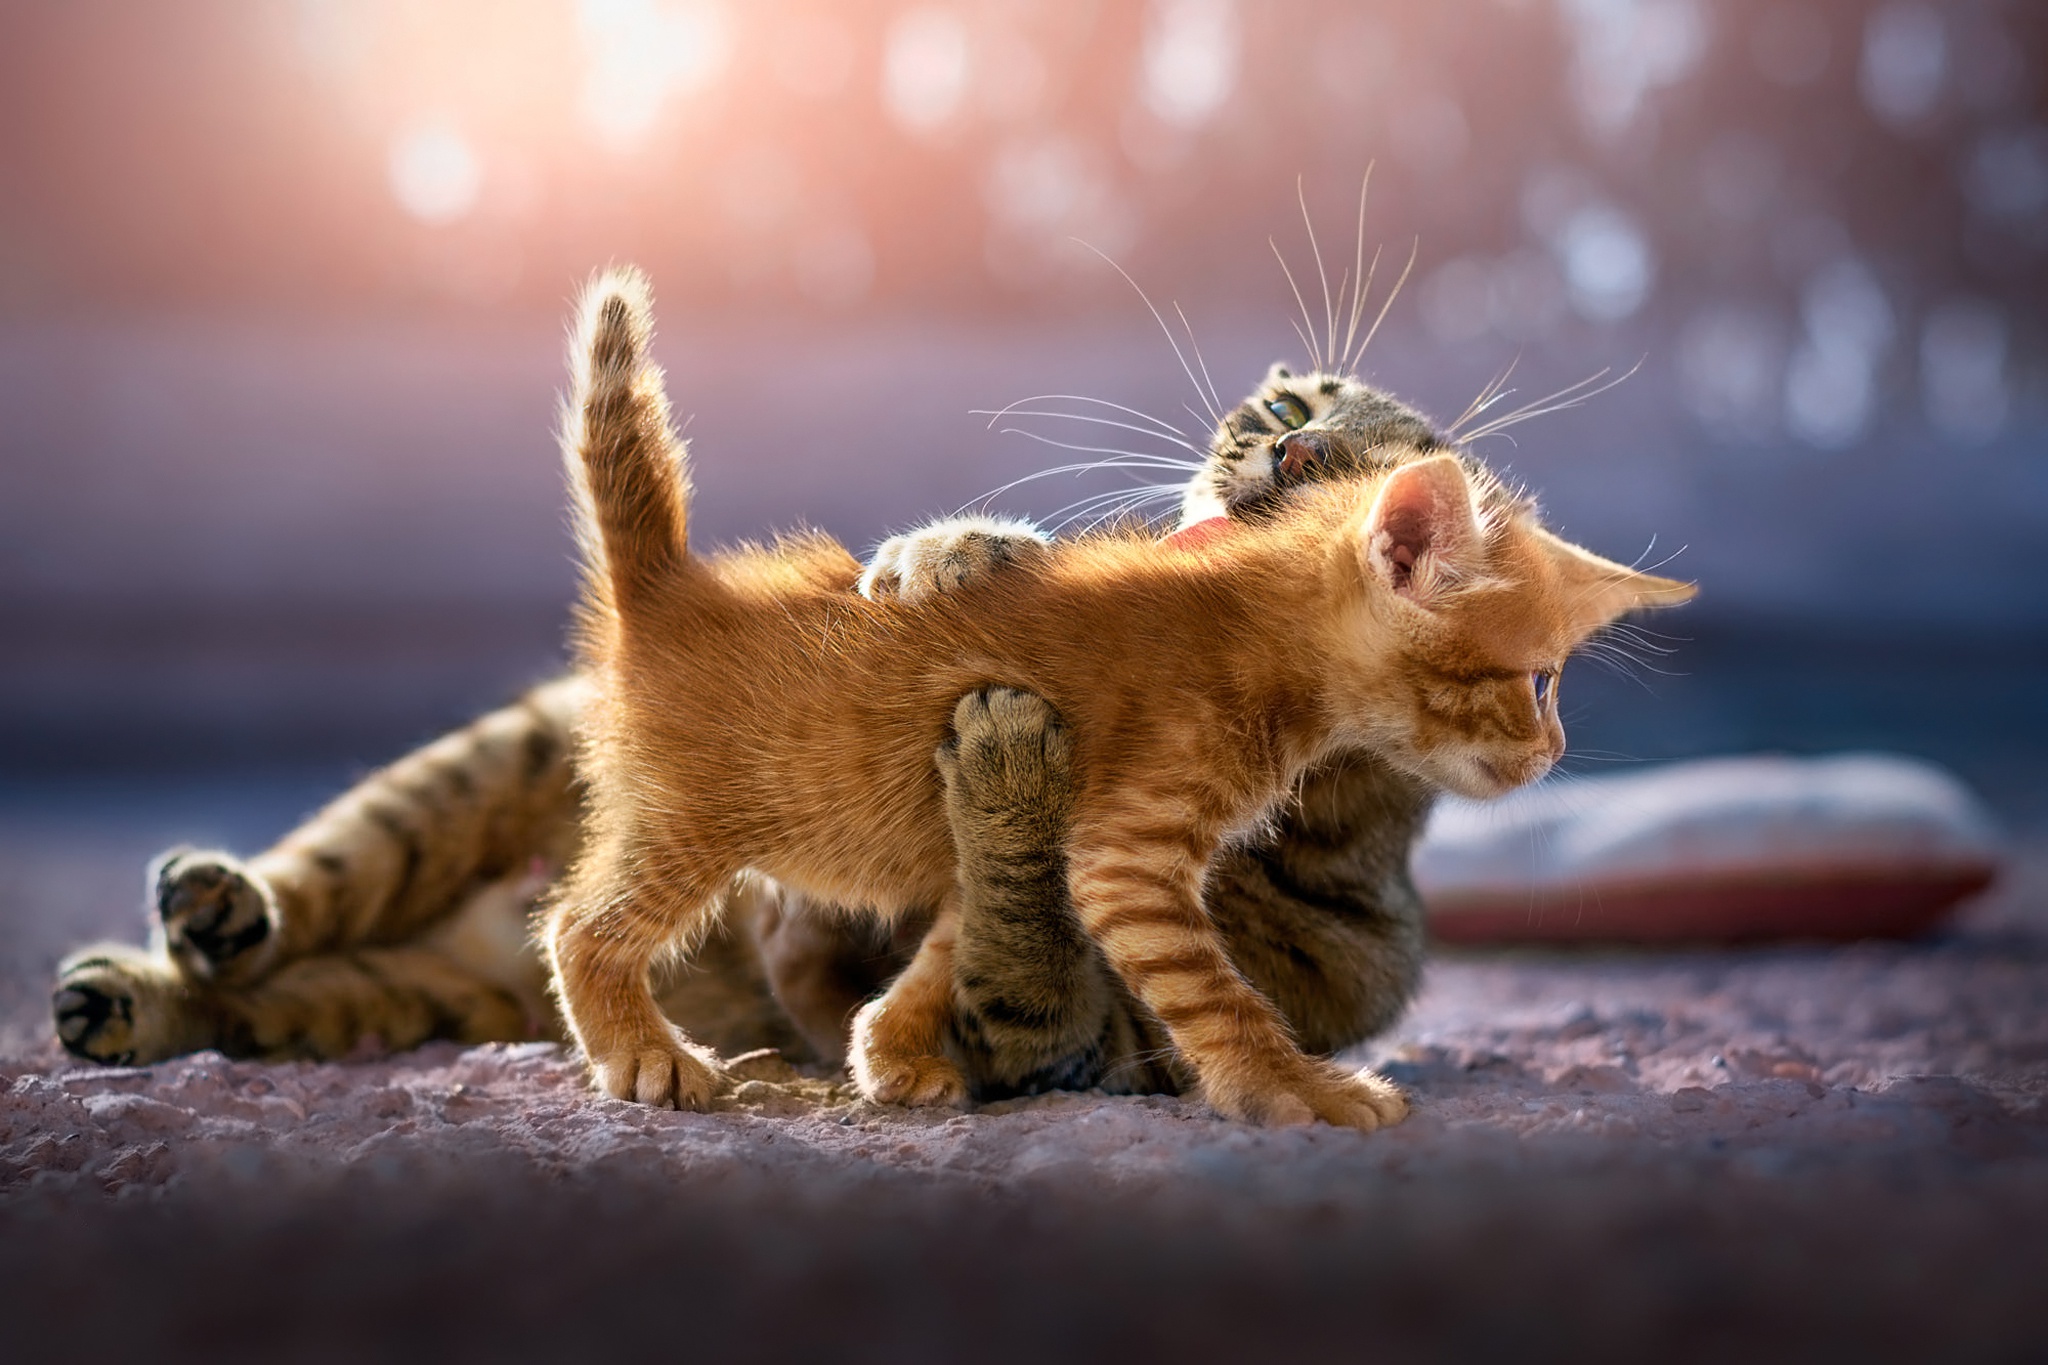 Cute Kittens, HD Animals, 4k Wallpapers, Images, Backgrounds, Photos